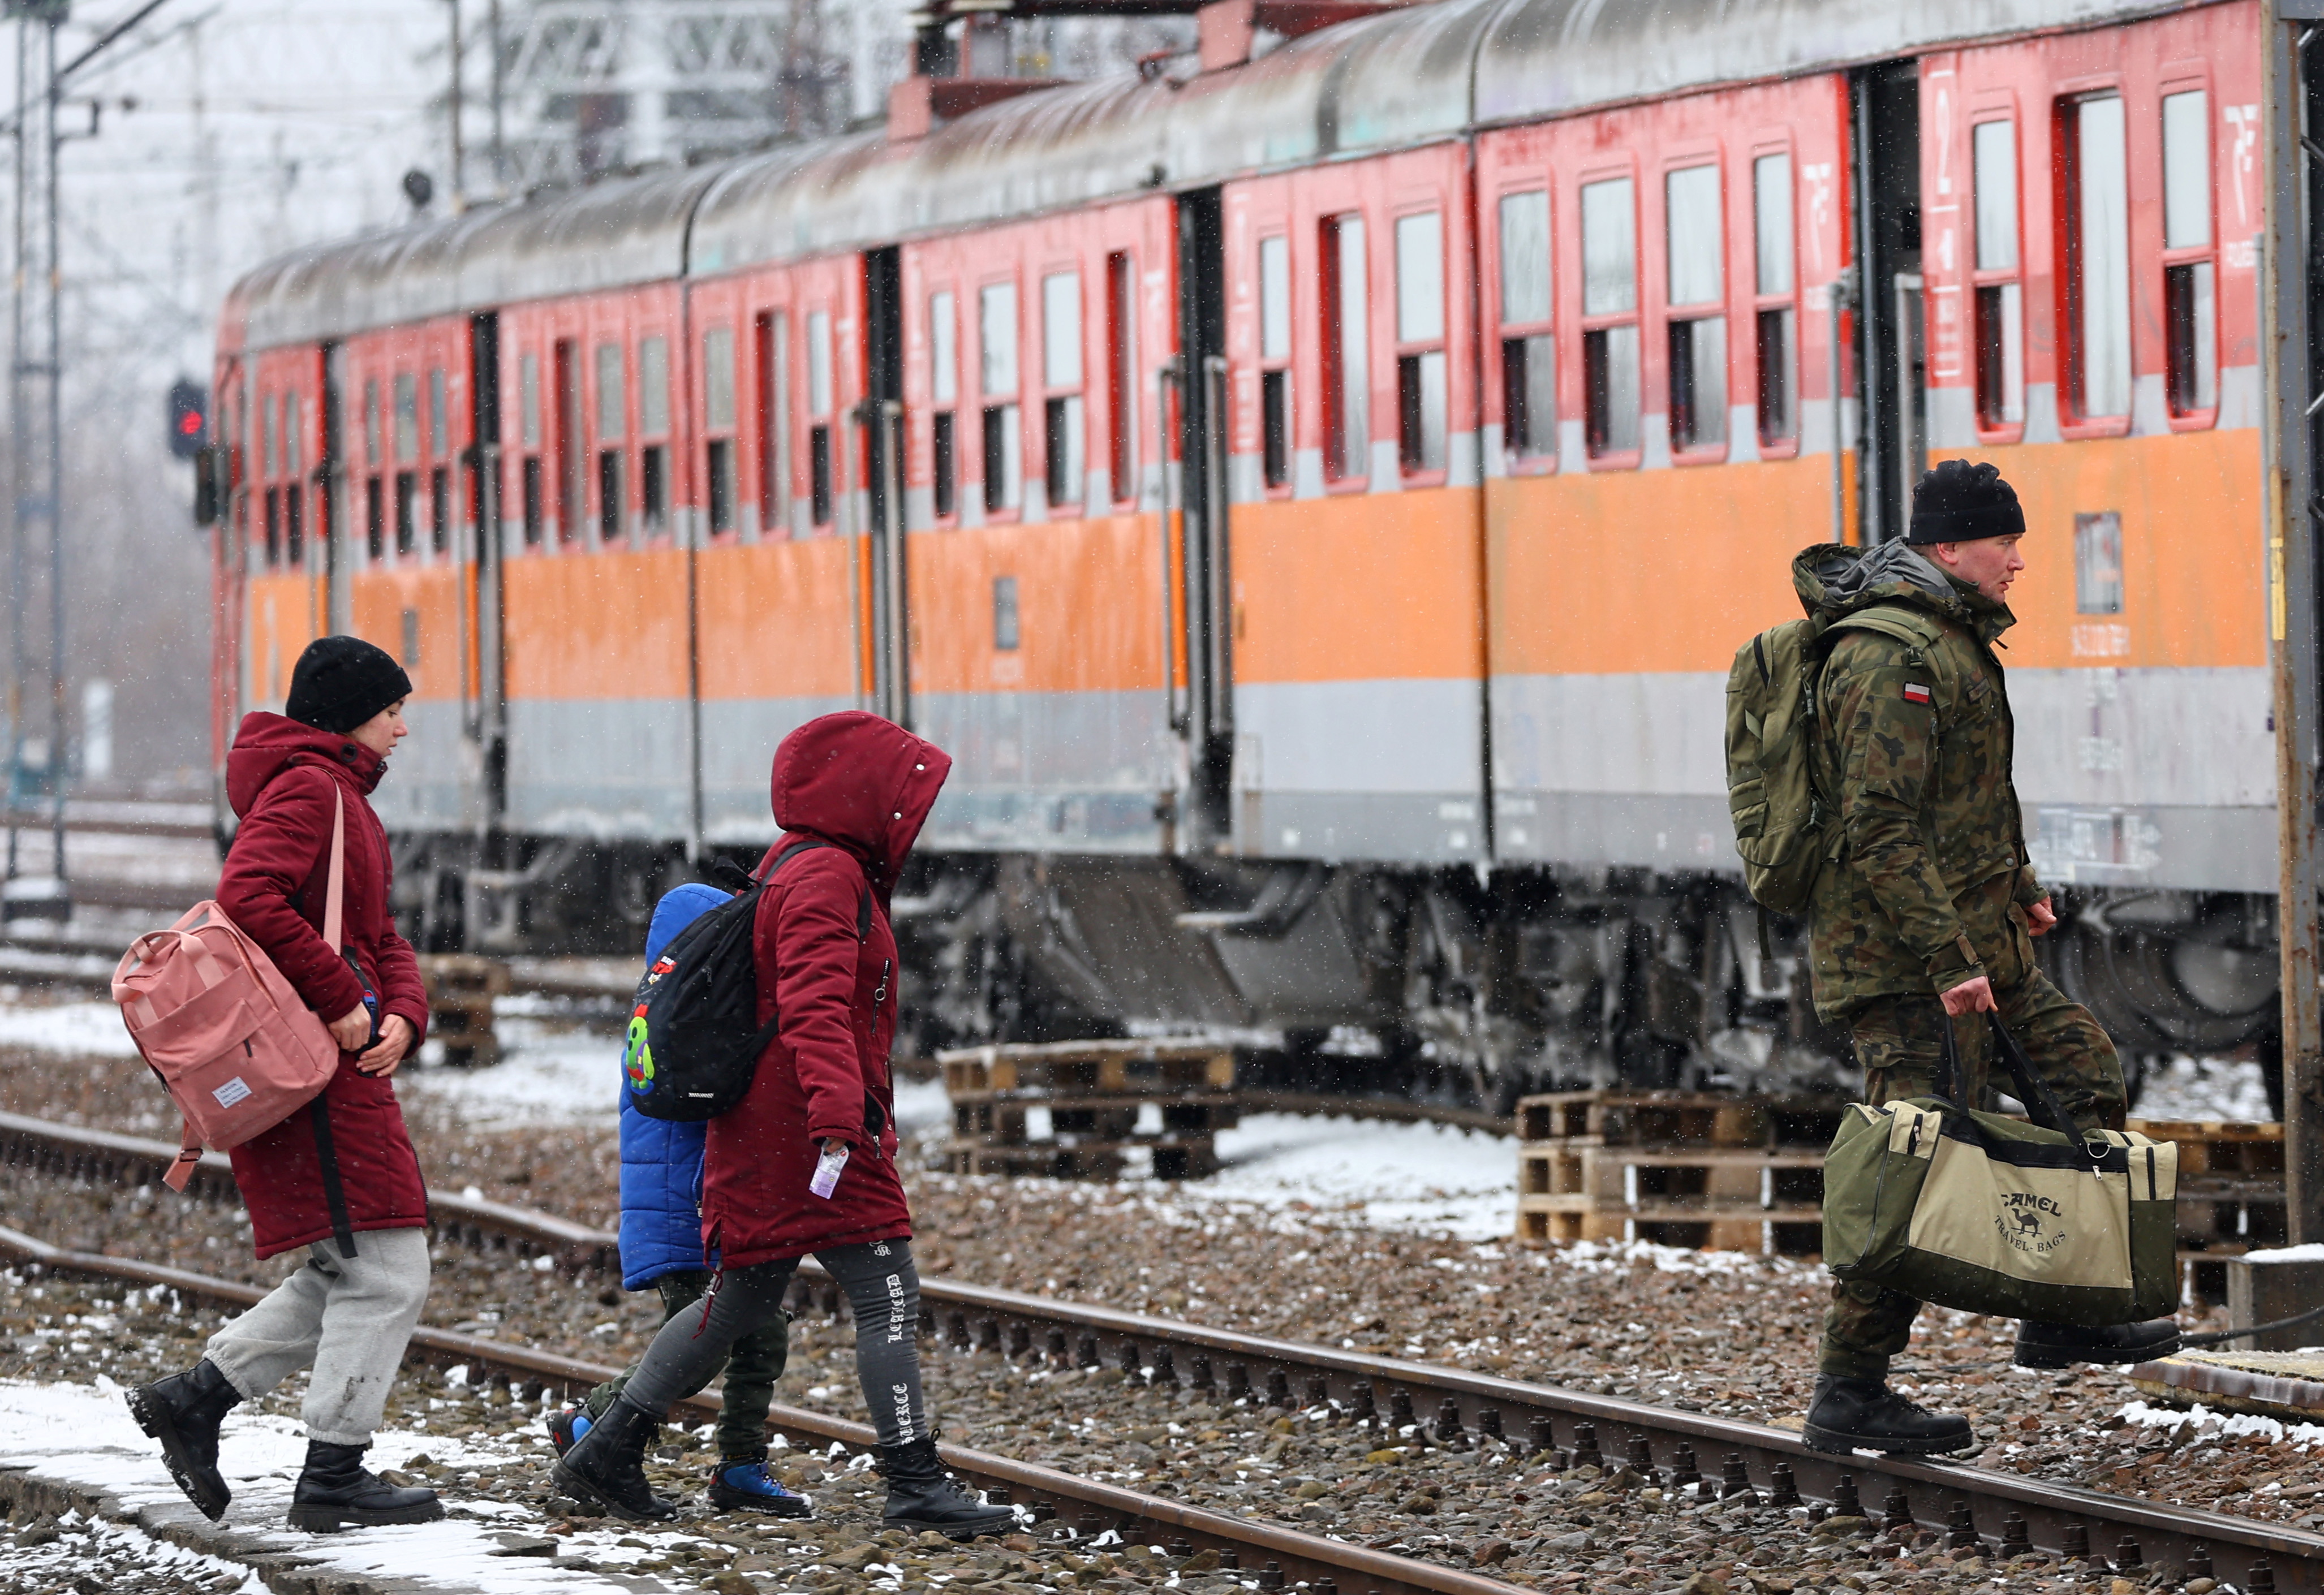 People fleeing Russia's invasion of Ukraine arrive at the border checkpoint in Medyka